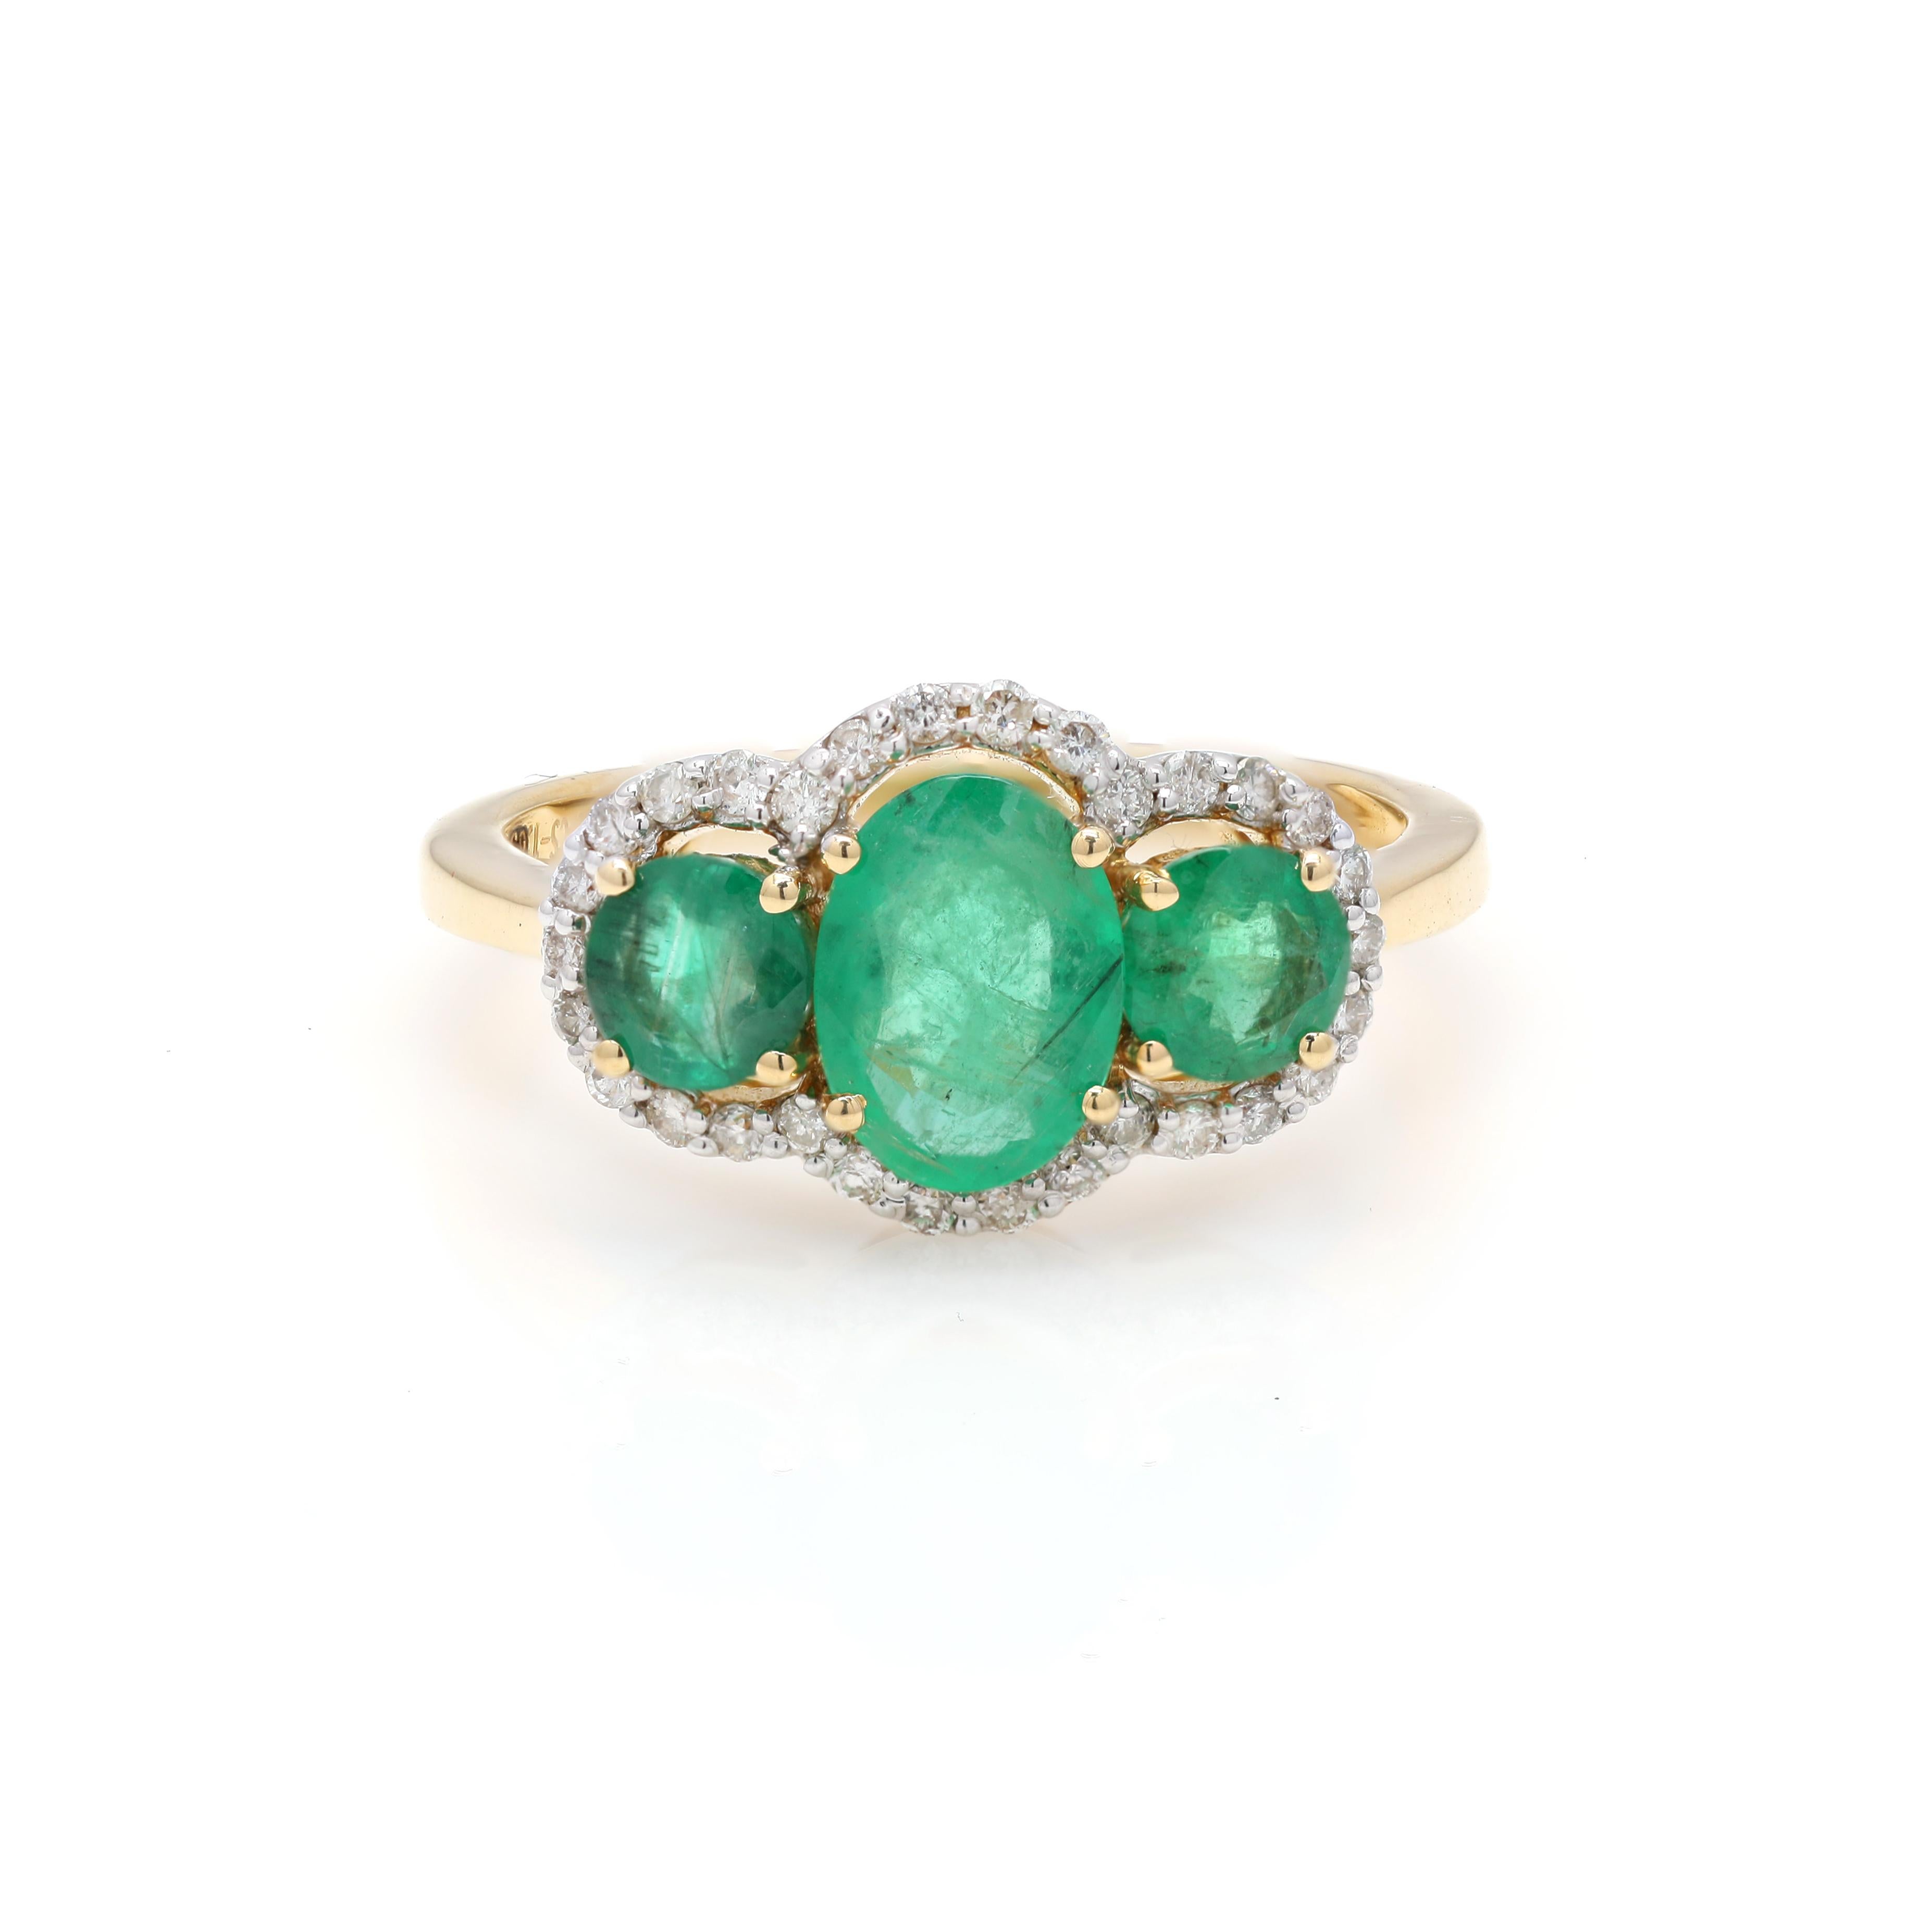 For Sale:  Natural 18k Yellow Gold Emerald Ring, Three Stone Emerald and Diamond Ring 4